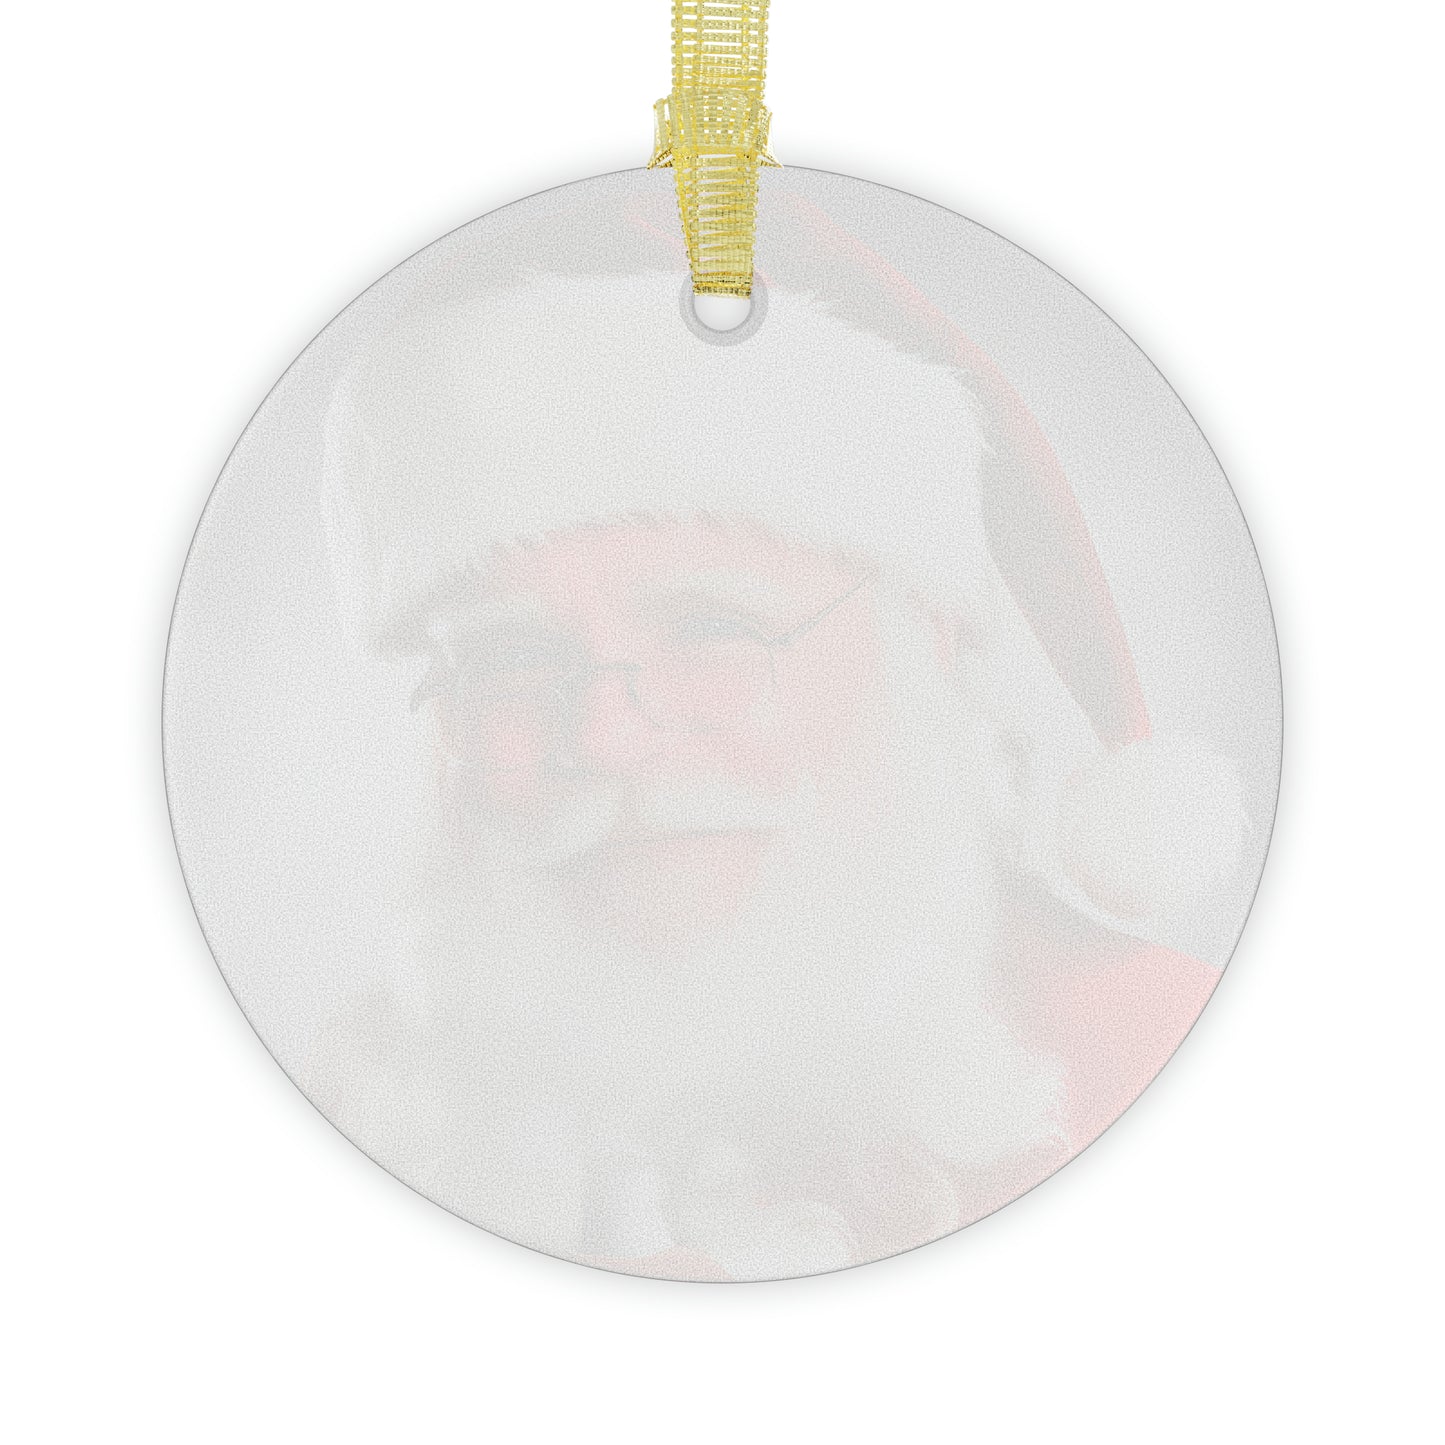 Christmas Santa Glass Ornaments, Comes with Gold Ribbon for Hanging